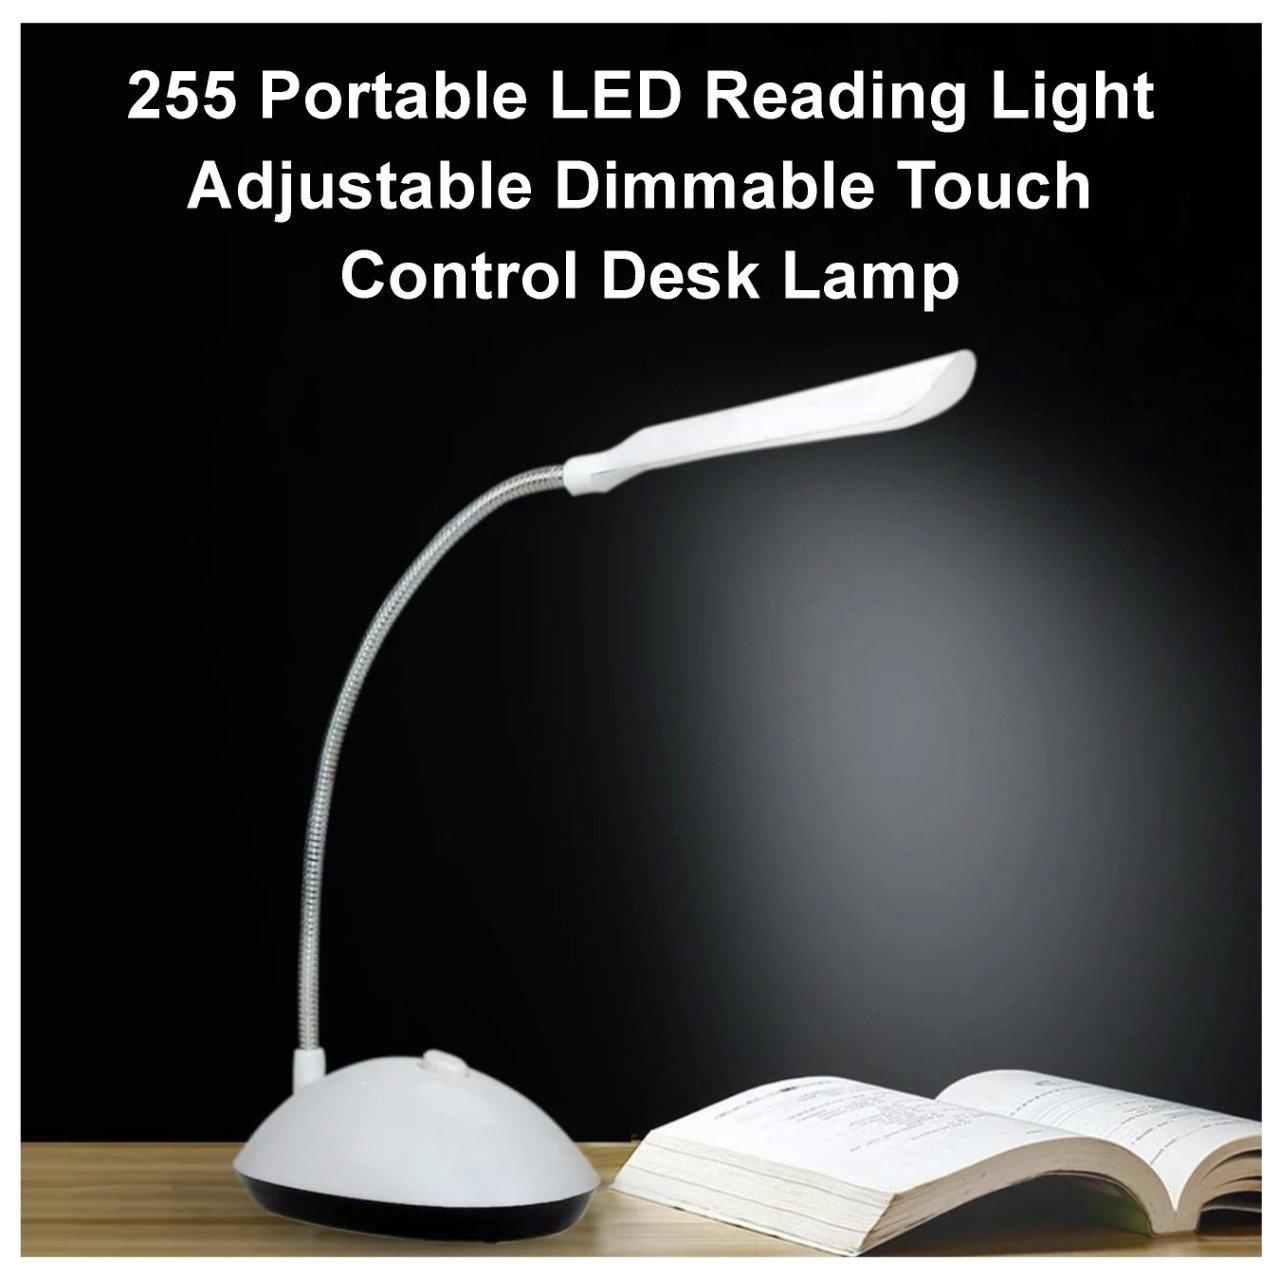 0255 Portable LED Reading Light Adjustable Dimmable Touch Control Desk Lamp - SkyShopy